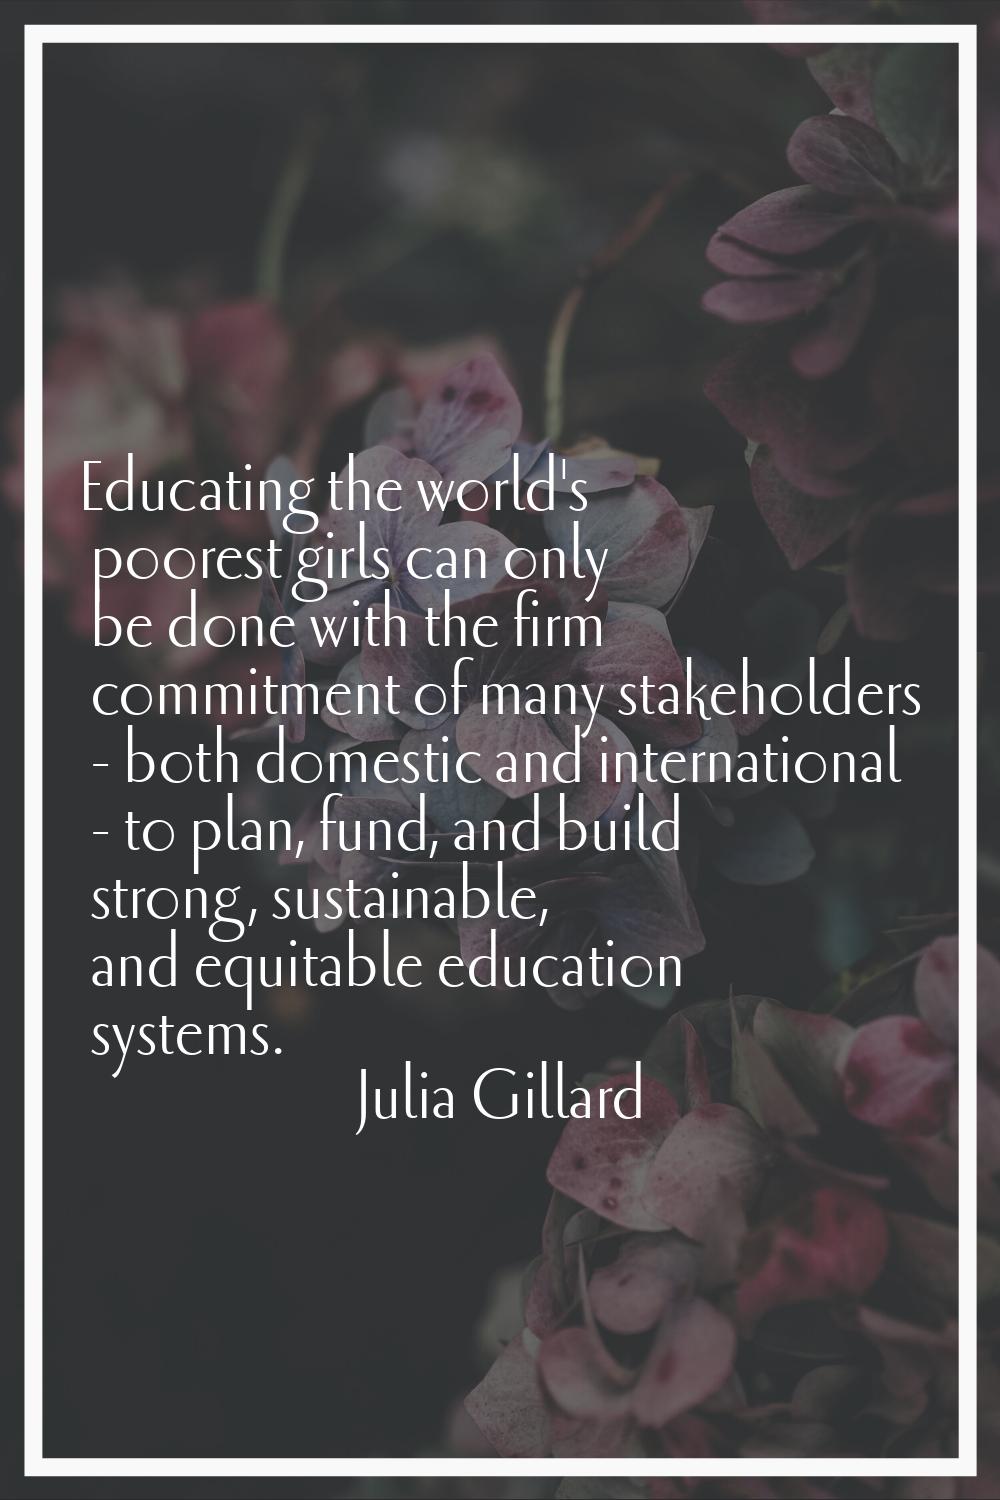 Educating the world's poorest girls can only be done with the firm commitment of many stakeholders 